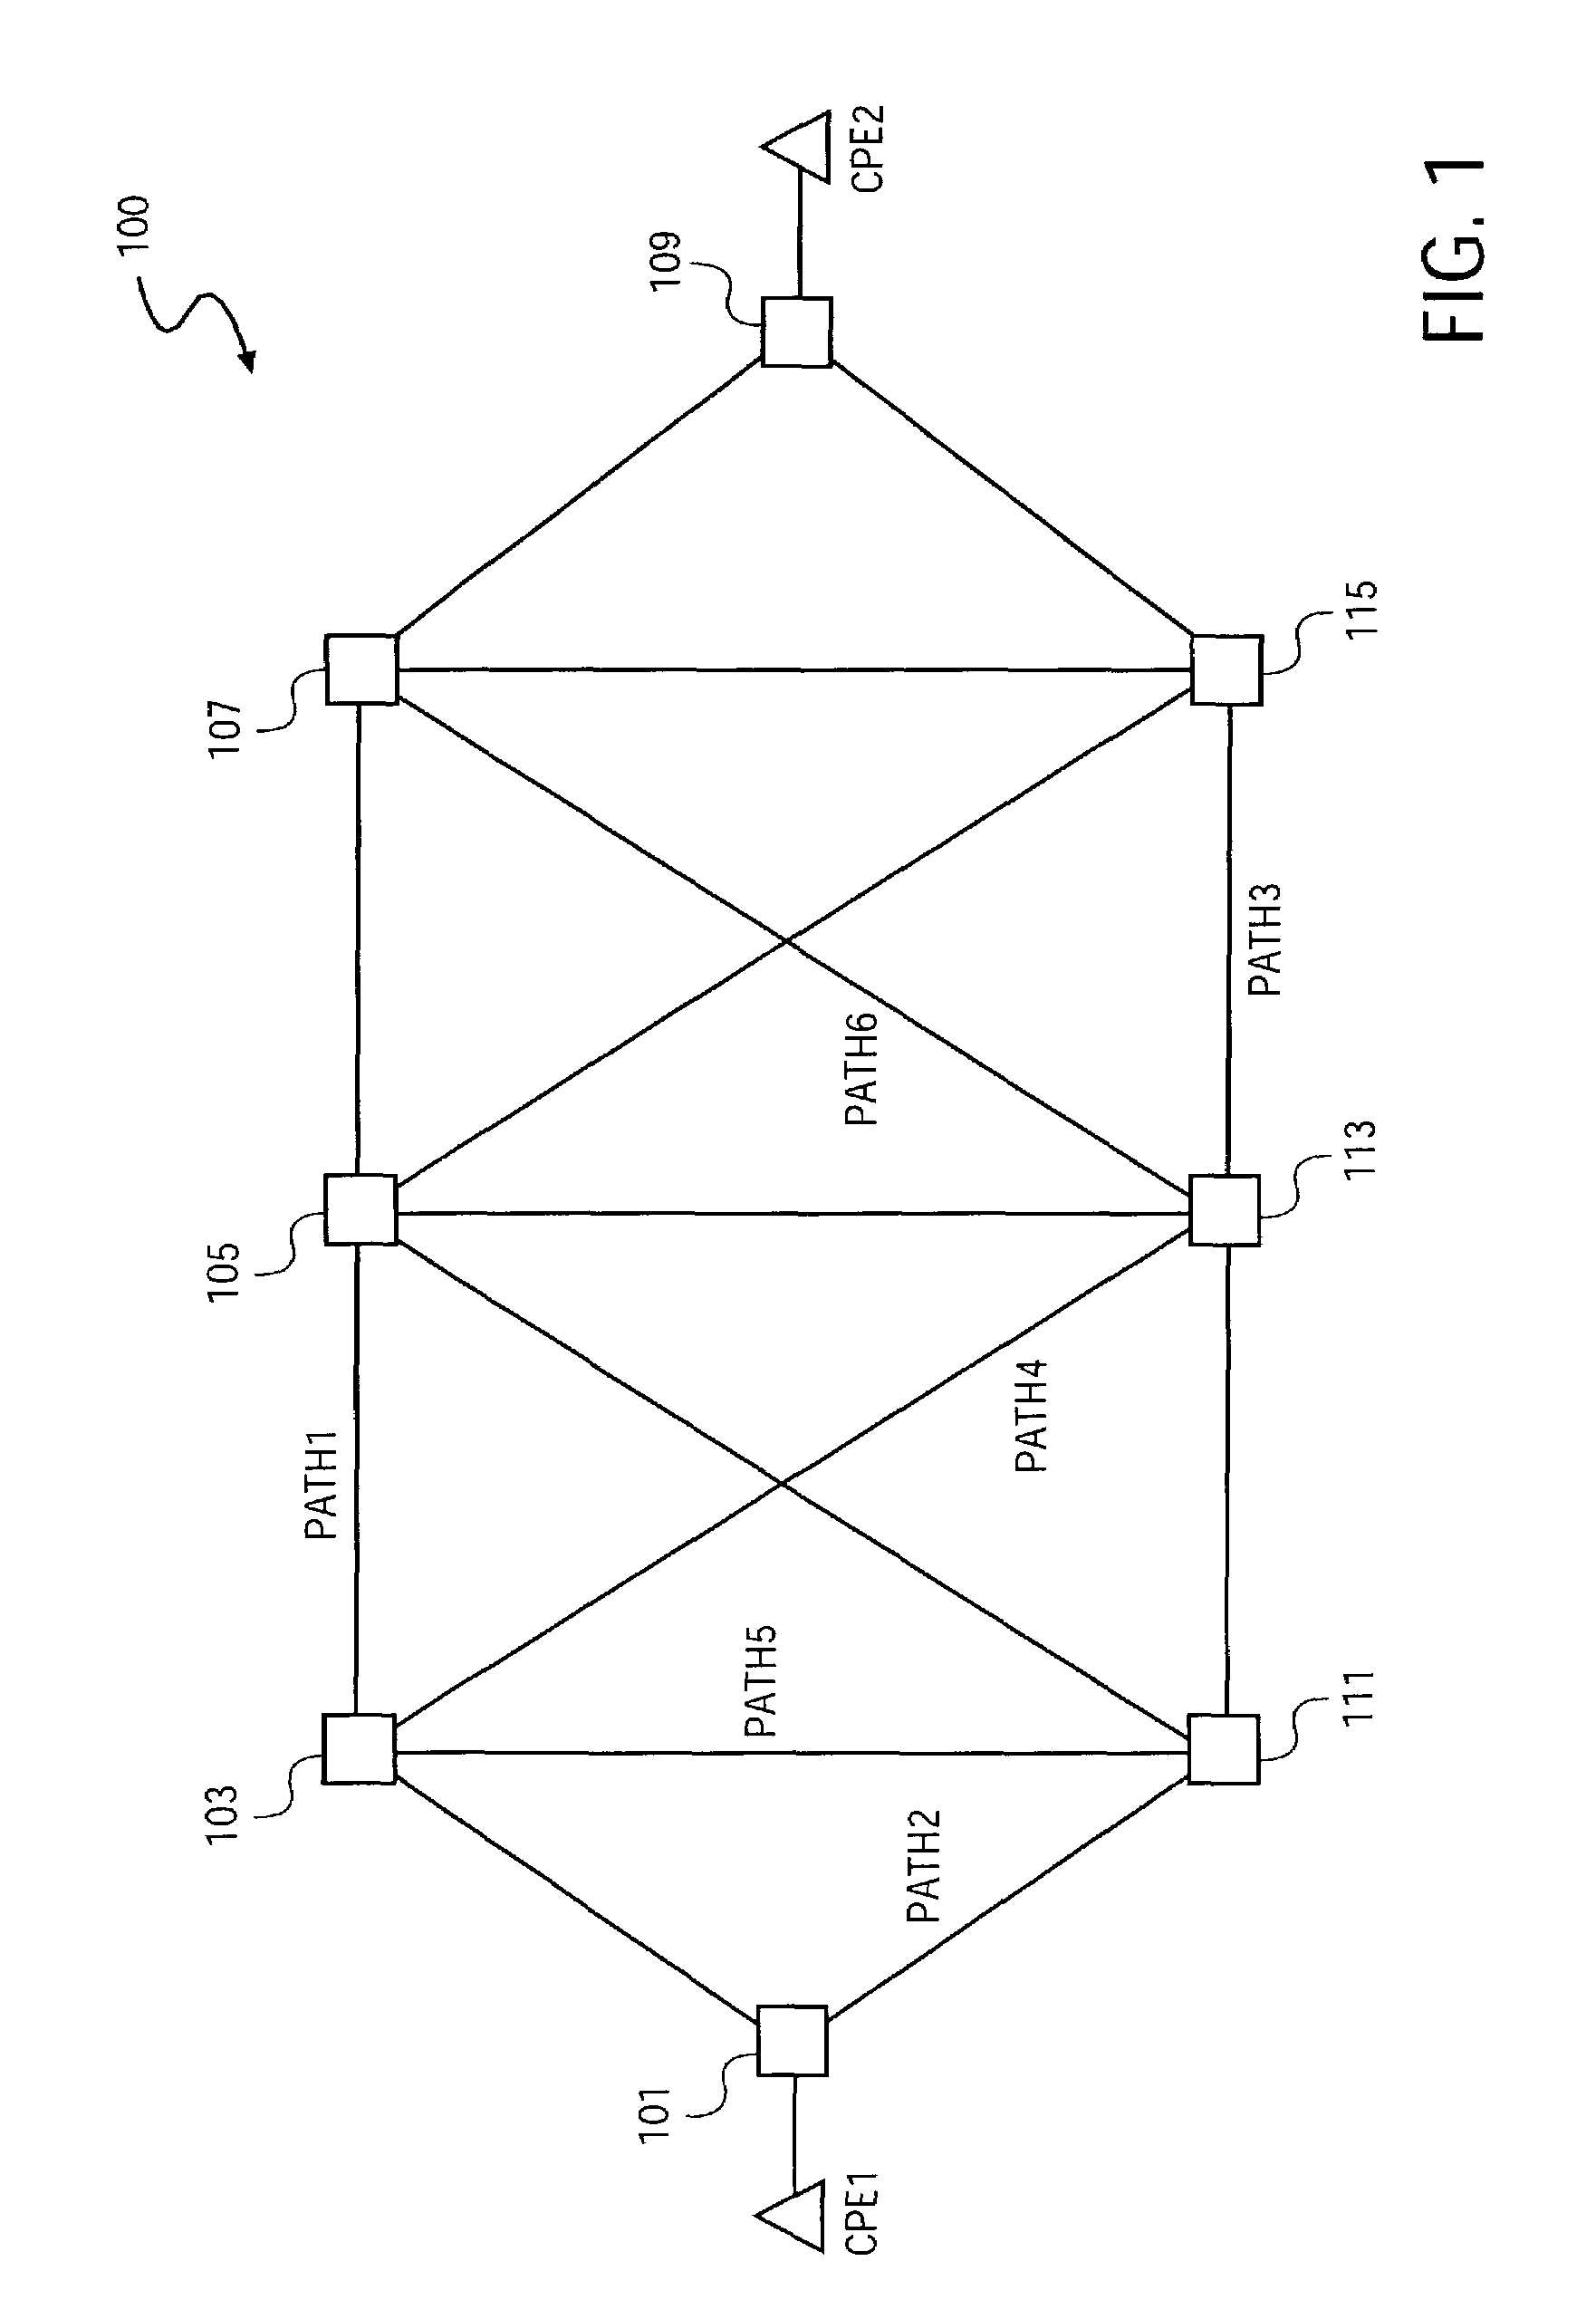 System and method to multicast guaranteed and best-effort traffic in a communications network